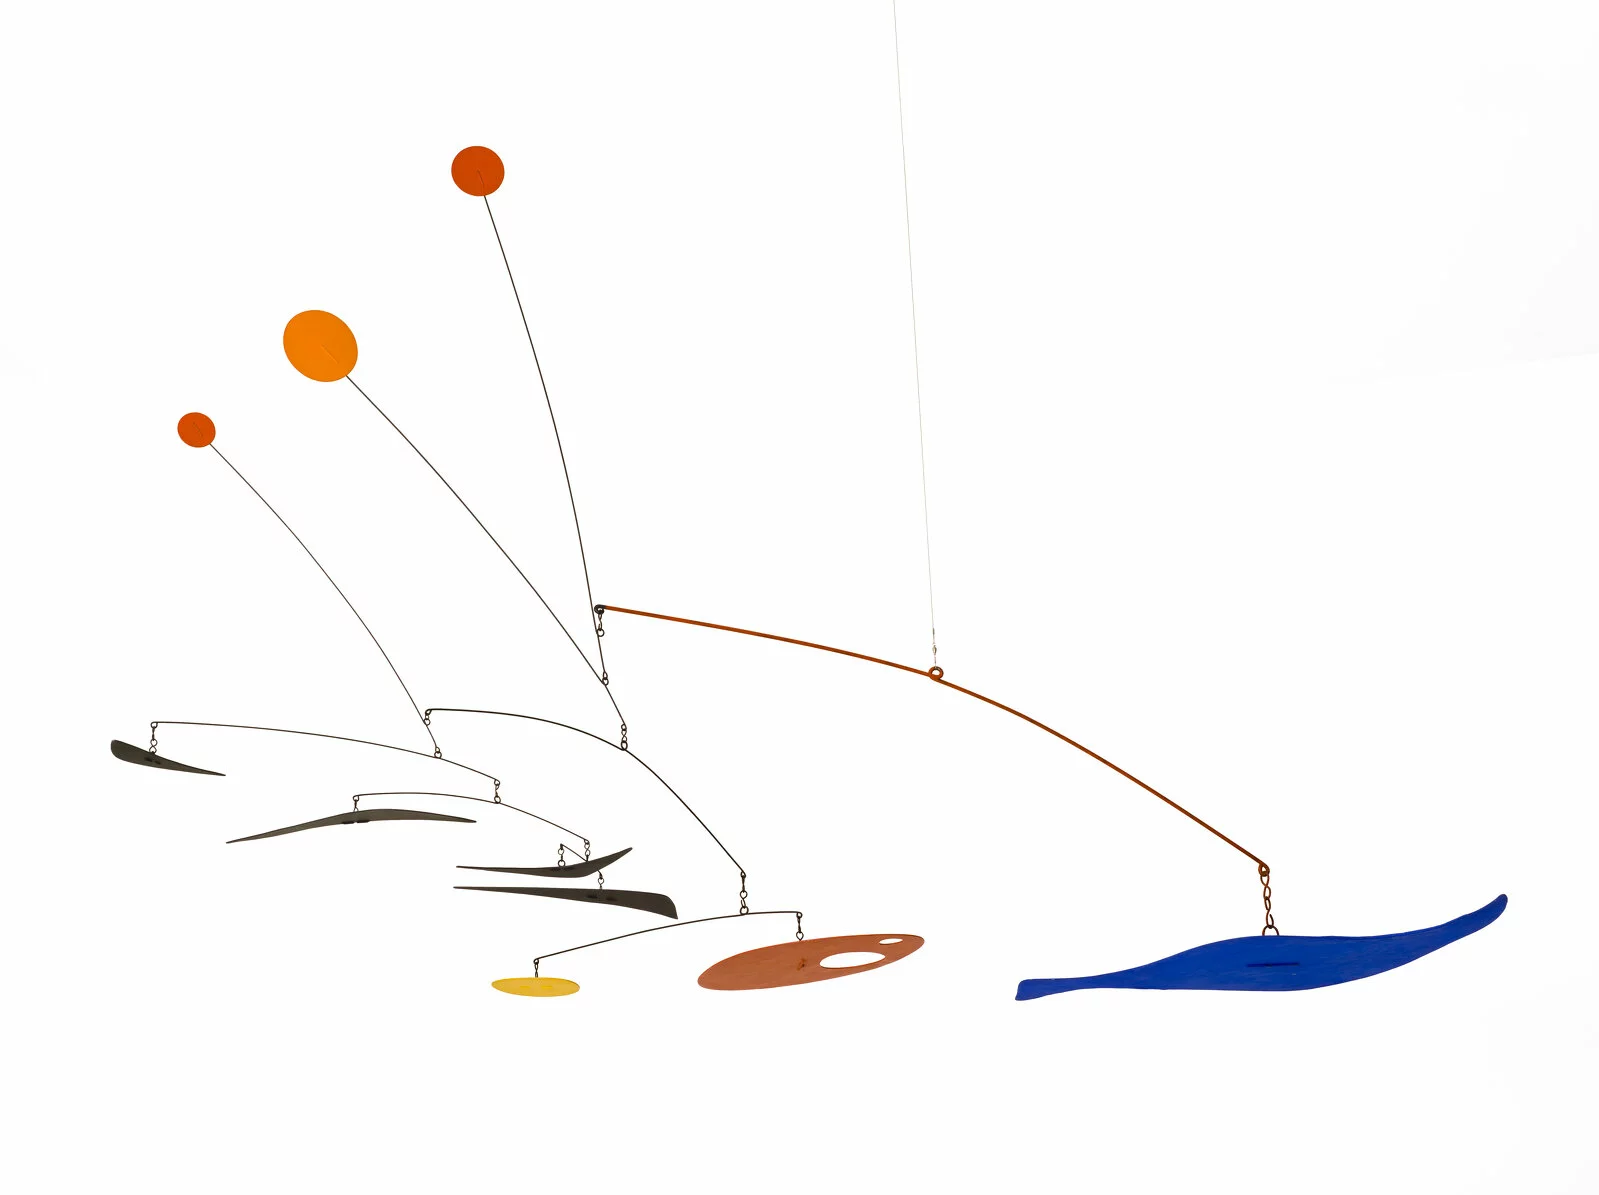 Alexander Calder (b. 1898, Lawton, PA; d. 1976, New York, NY), Four Boomerangs, c. 1949.
Collection Museum of Contemporary Art Chicago, Gift of Ruth Horwich, 1991.92
© 2022 Calder Foundation, New York/Artists Rights Society (ARS), New York
Photo: Nathan Keay, © MCA Chicago
 2022/06/1991_92_v13_edit2.jpg 